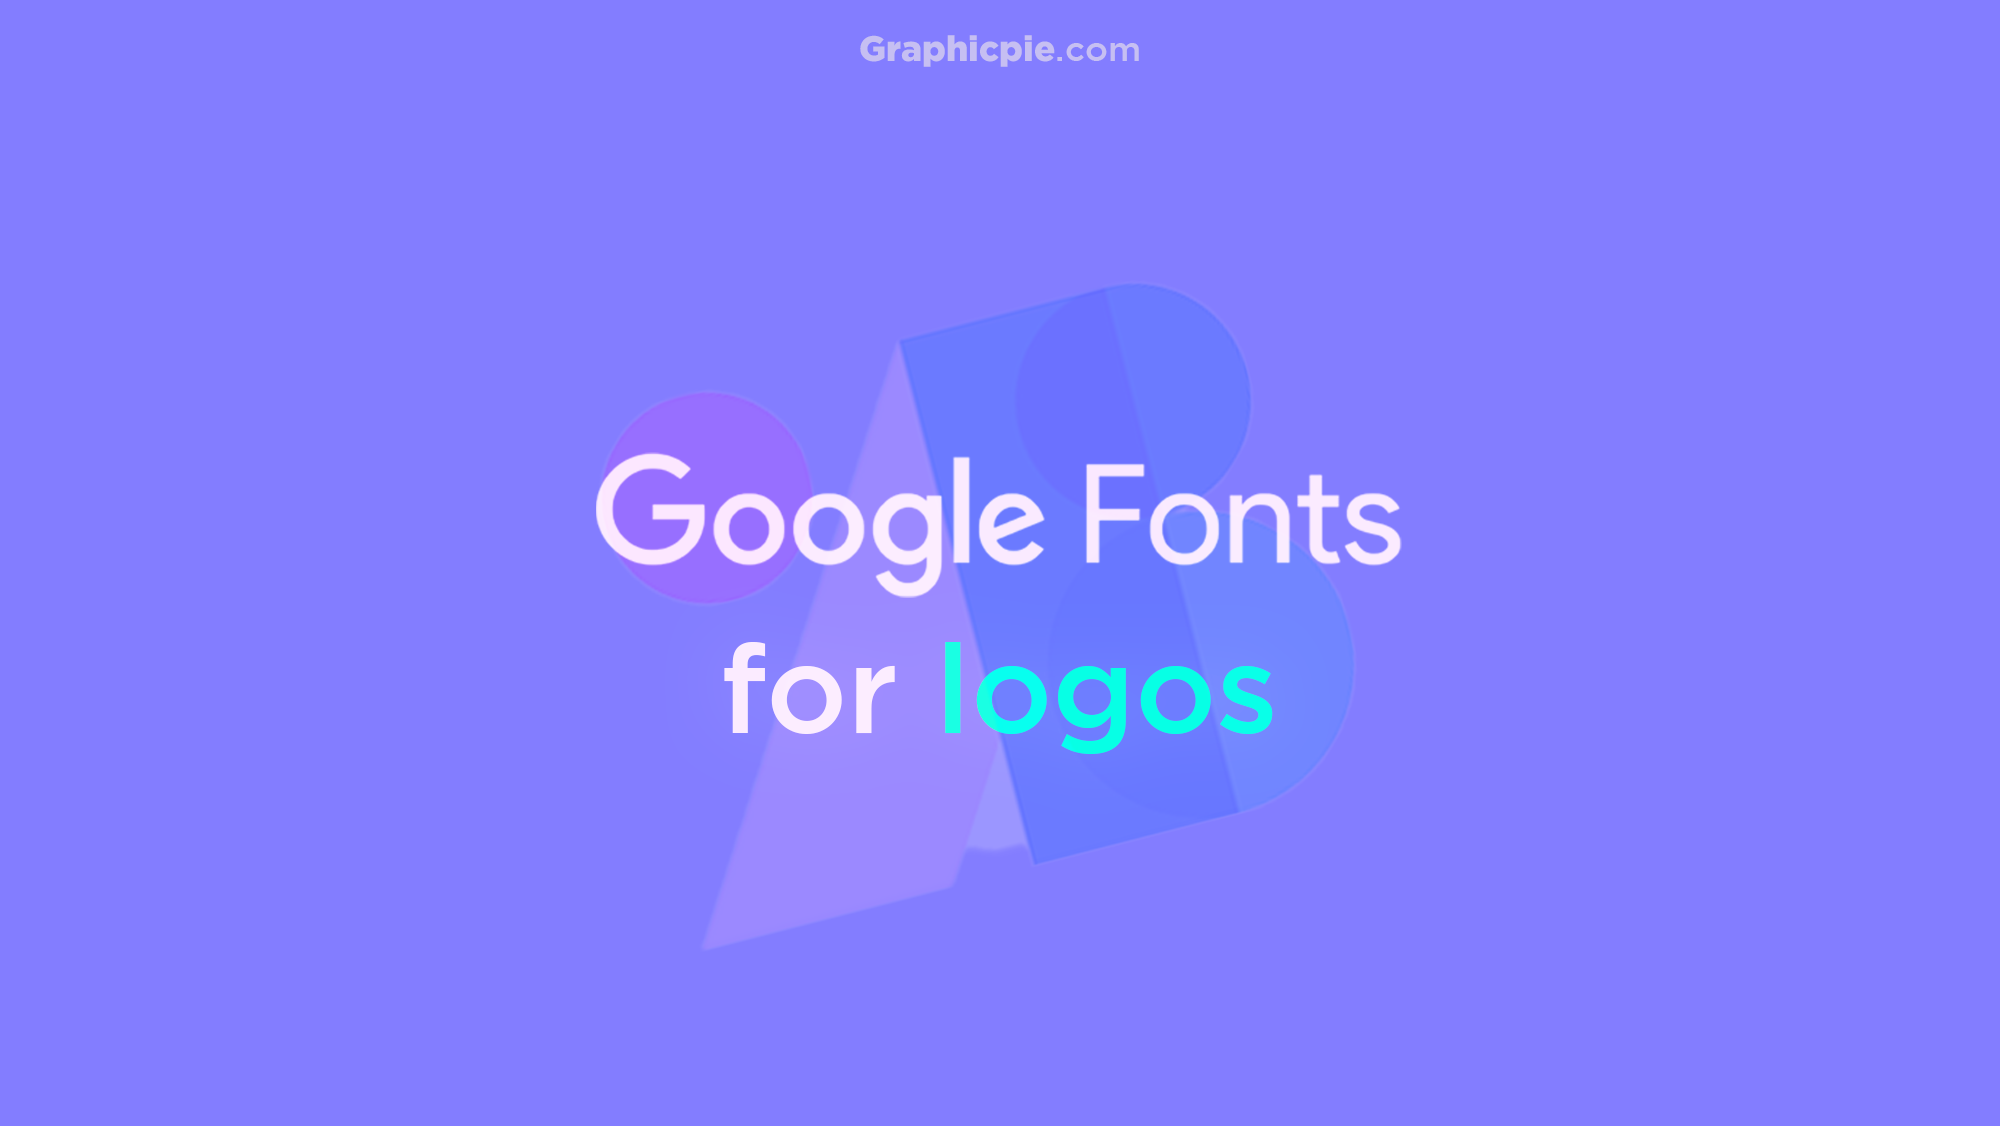 google fonts are free